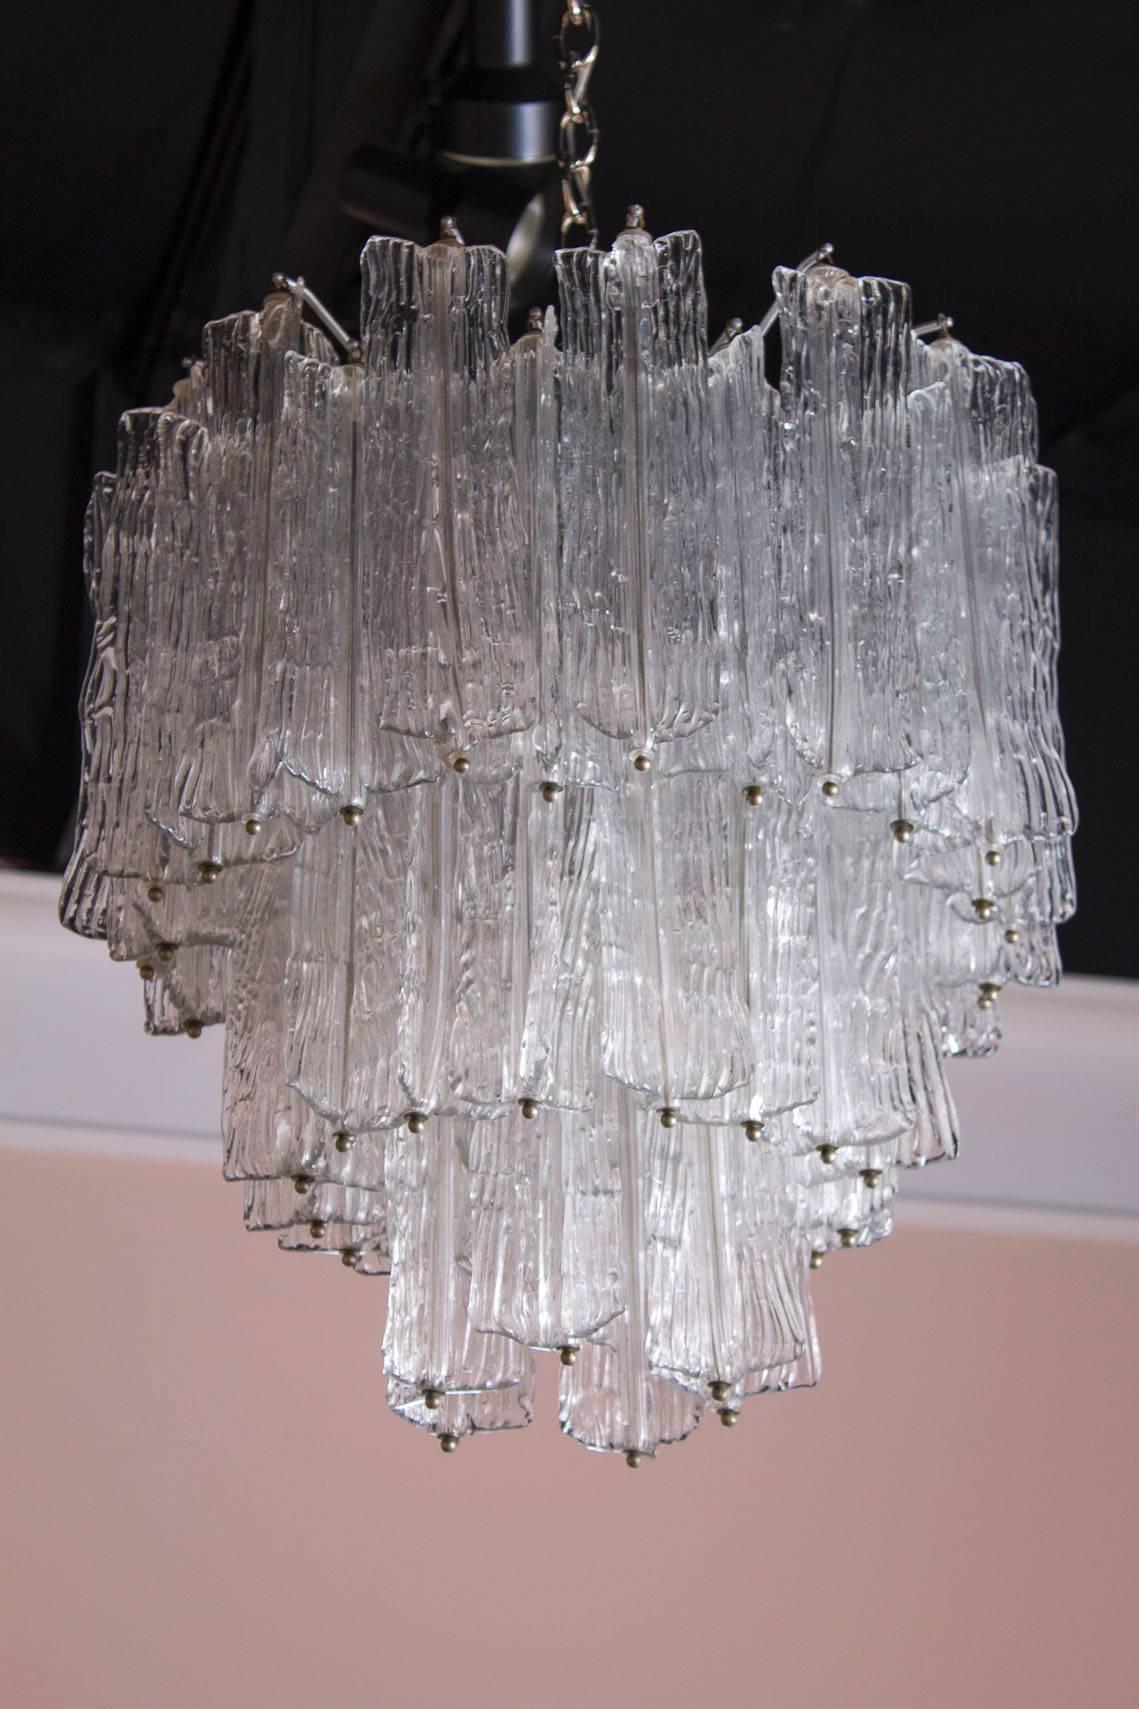 A stunning Italian chandelier brought to life by designer Toni Zuccheri in the 1950s. The clear handblown Murano glass is suspended by a multi-tiered nickel frame.